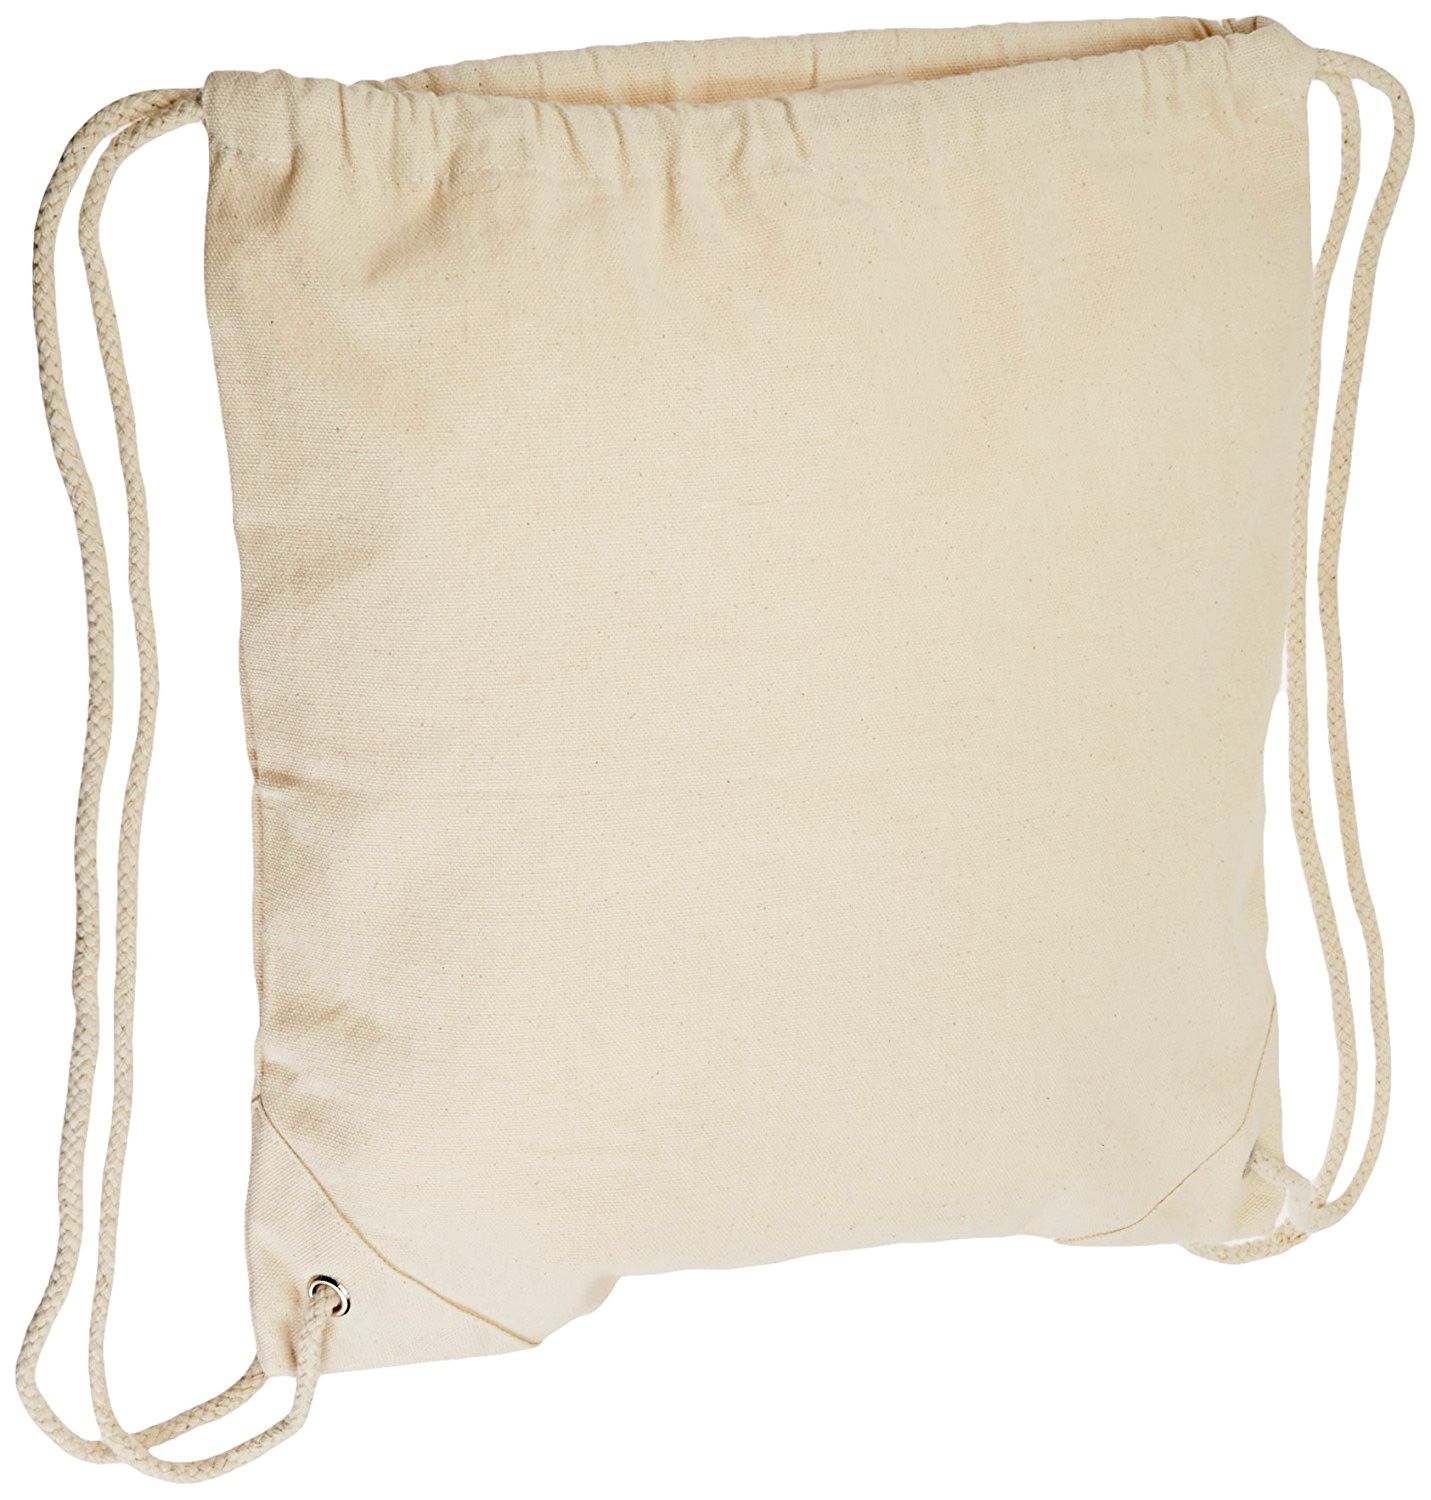 Small Canvas Drawstring Bags with Bright Trim